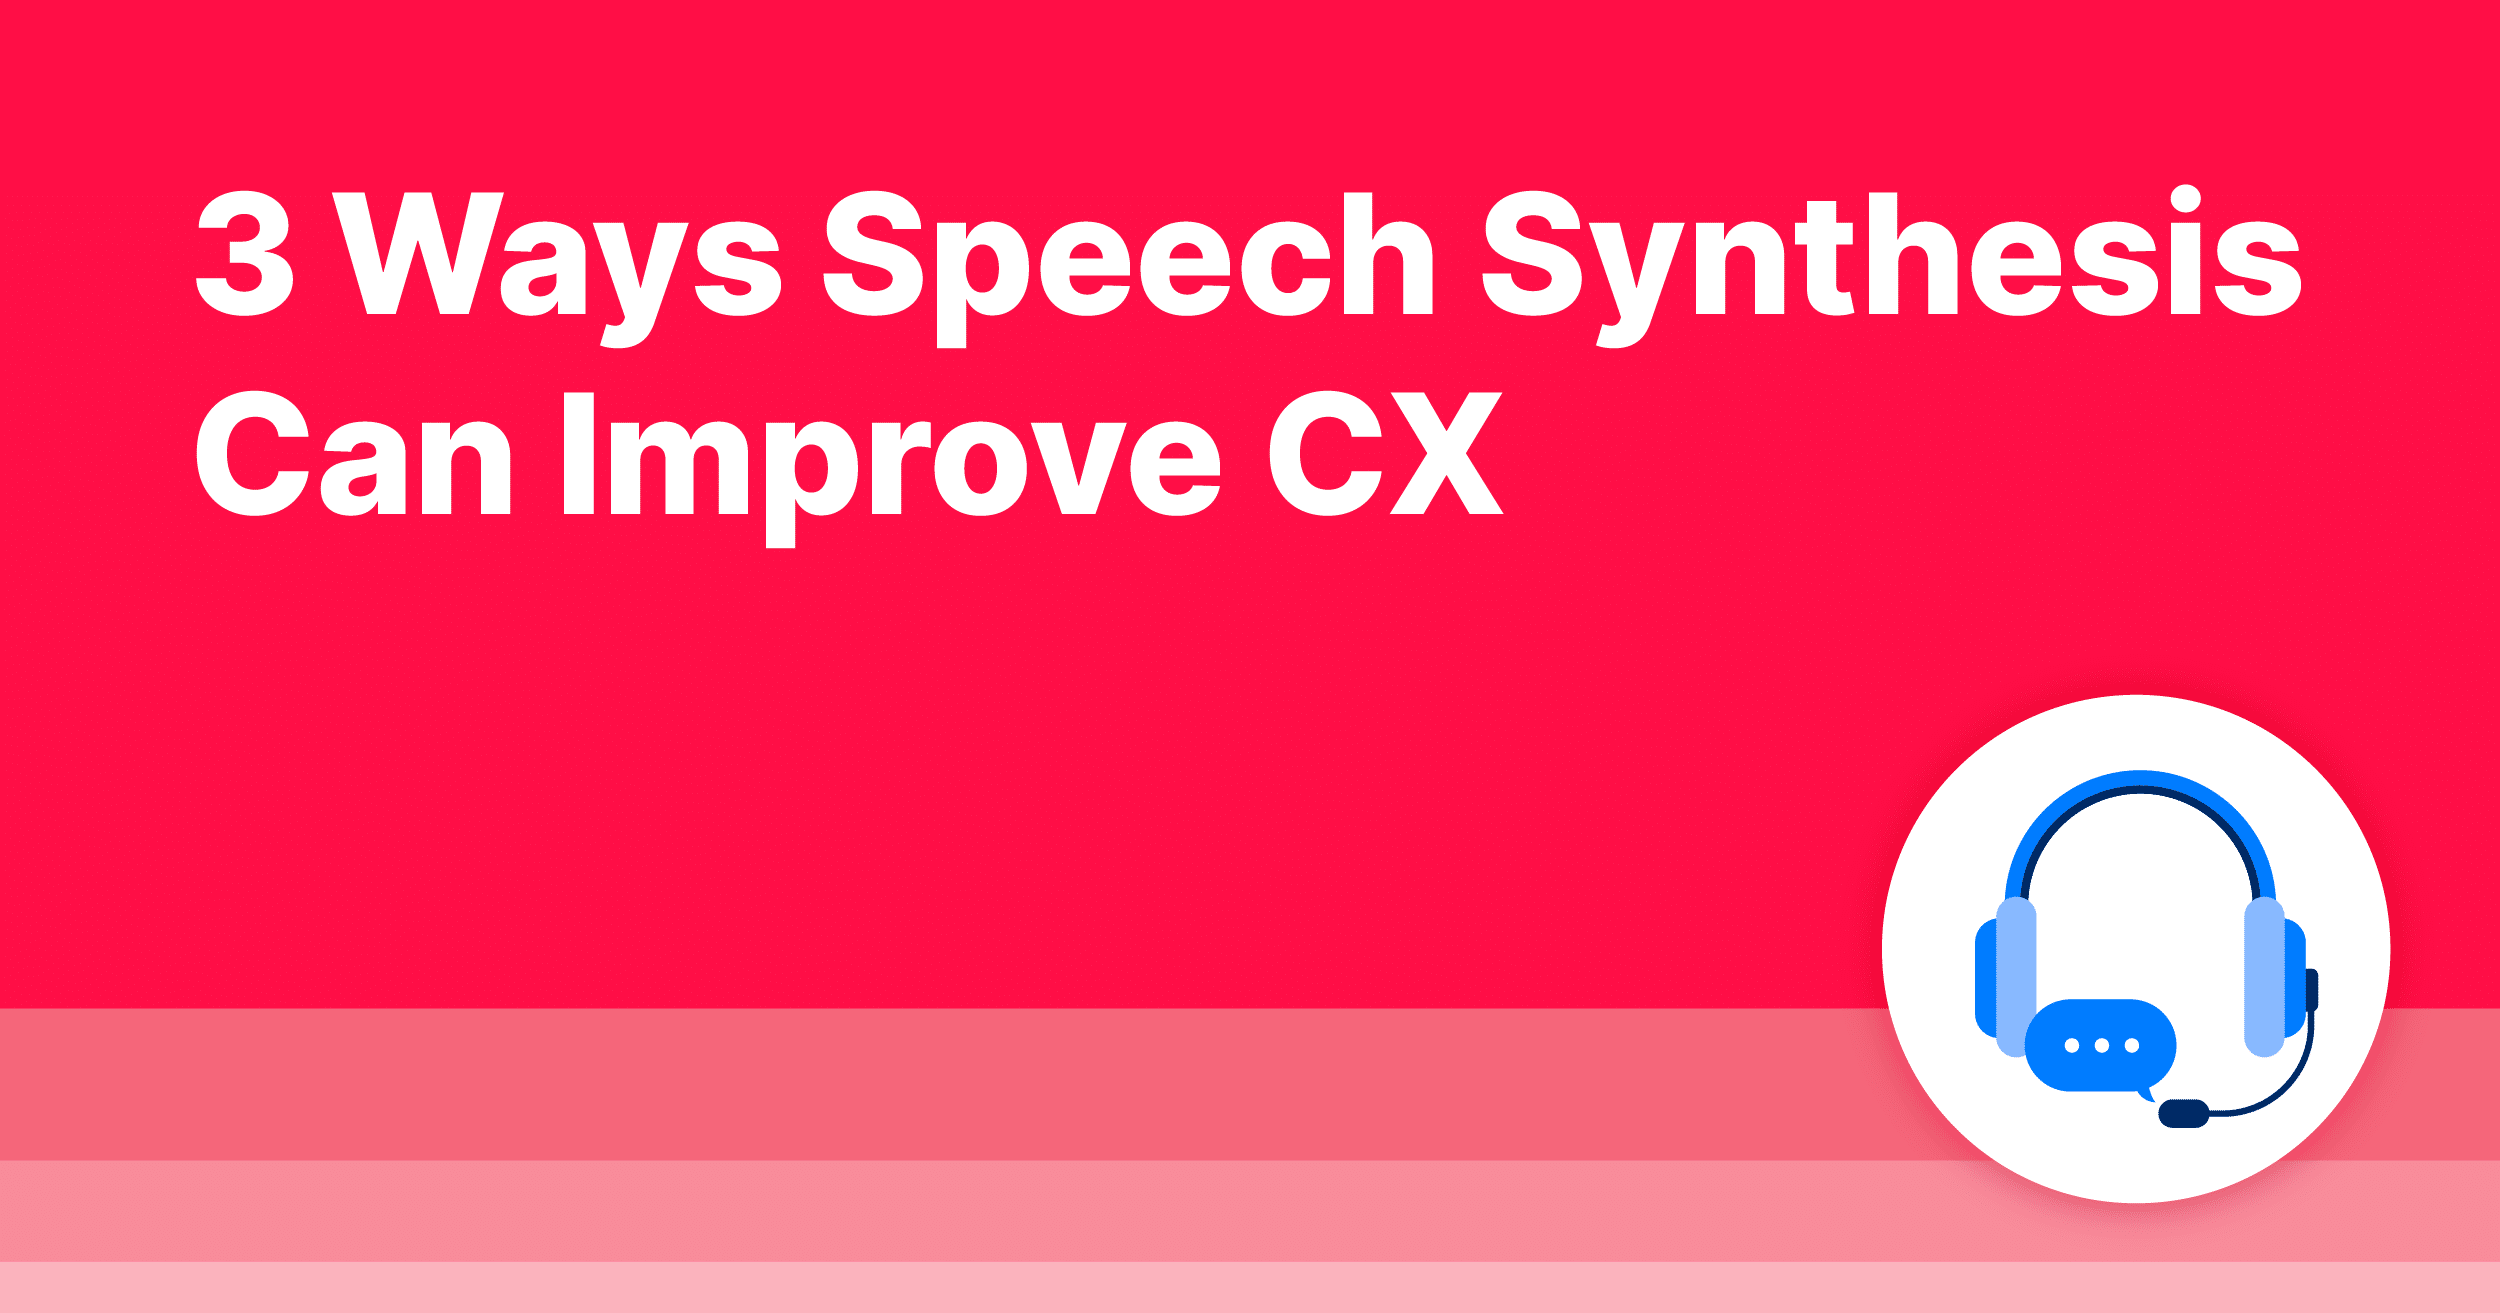 3 Ways Speech Synthesis Can Improve CX